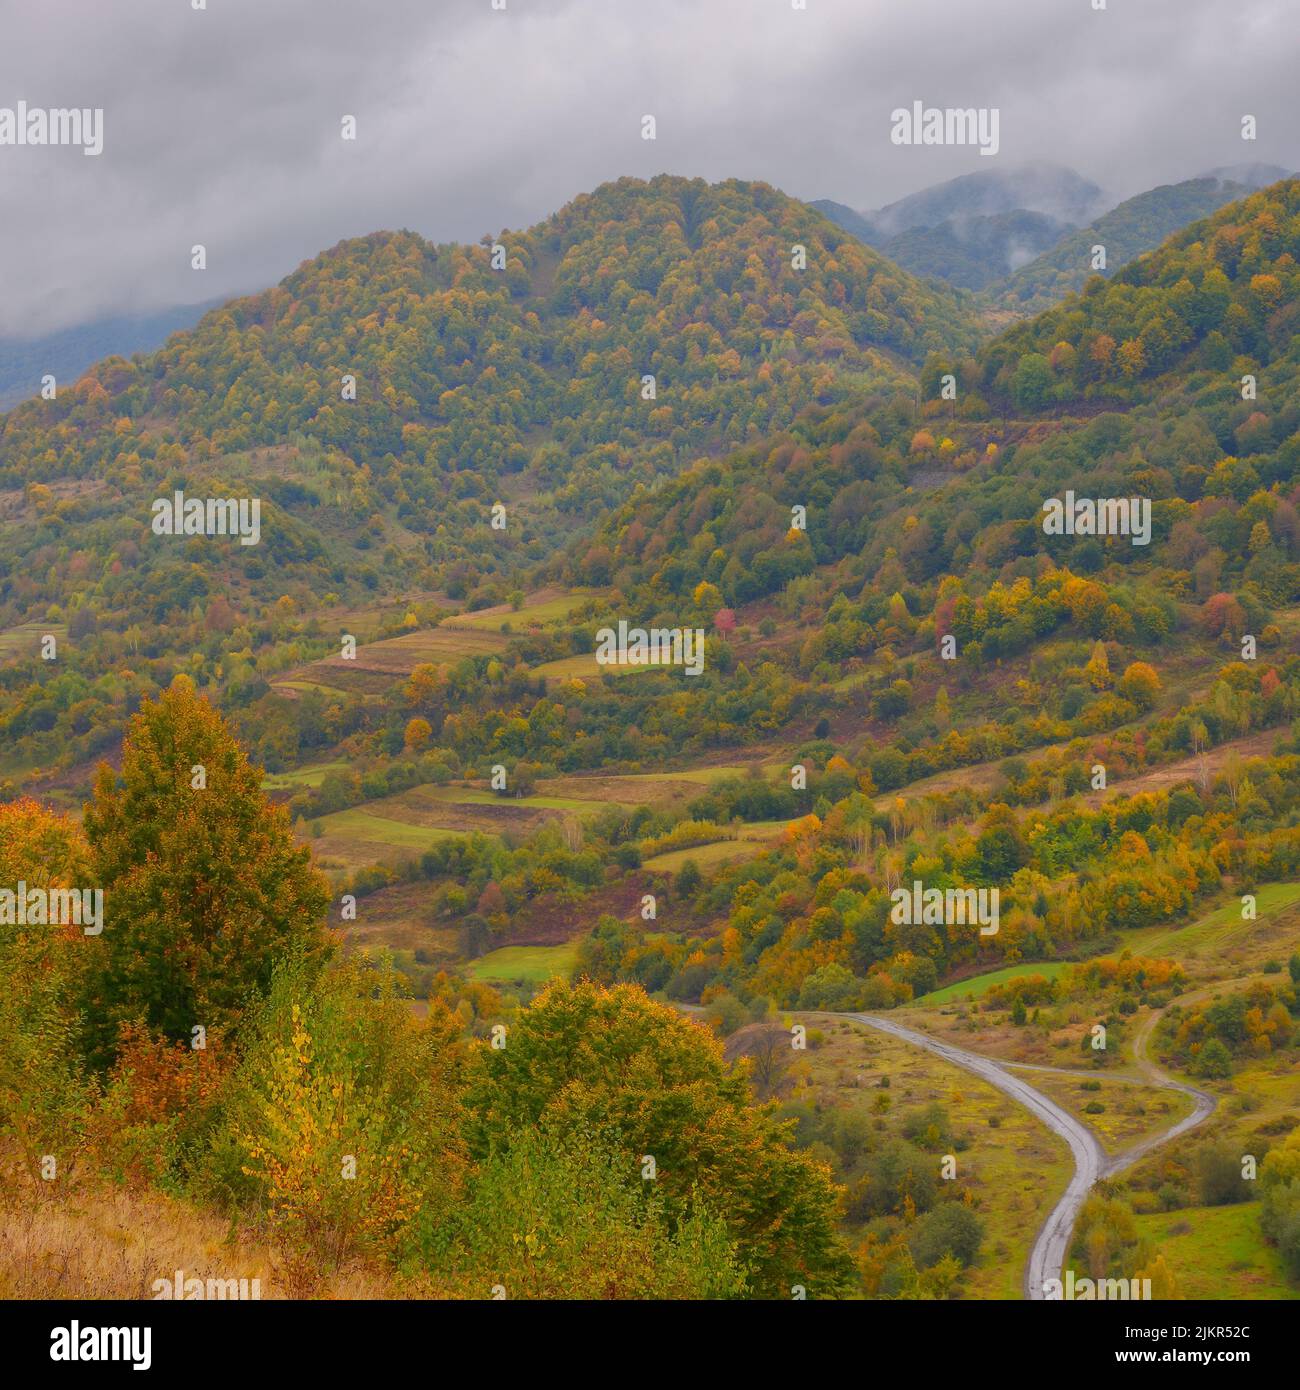 countryside landscape in mountains. overcast weather in autumn. trees in colorful foliage on the hills. country road winding down through the valley Stock Photo